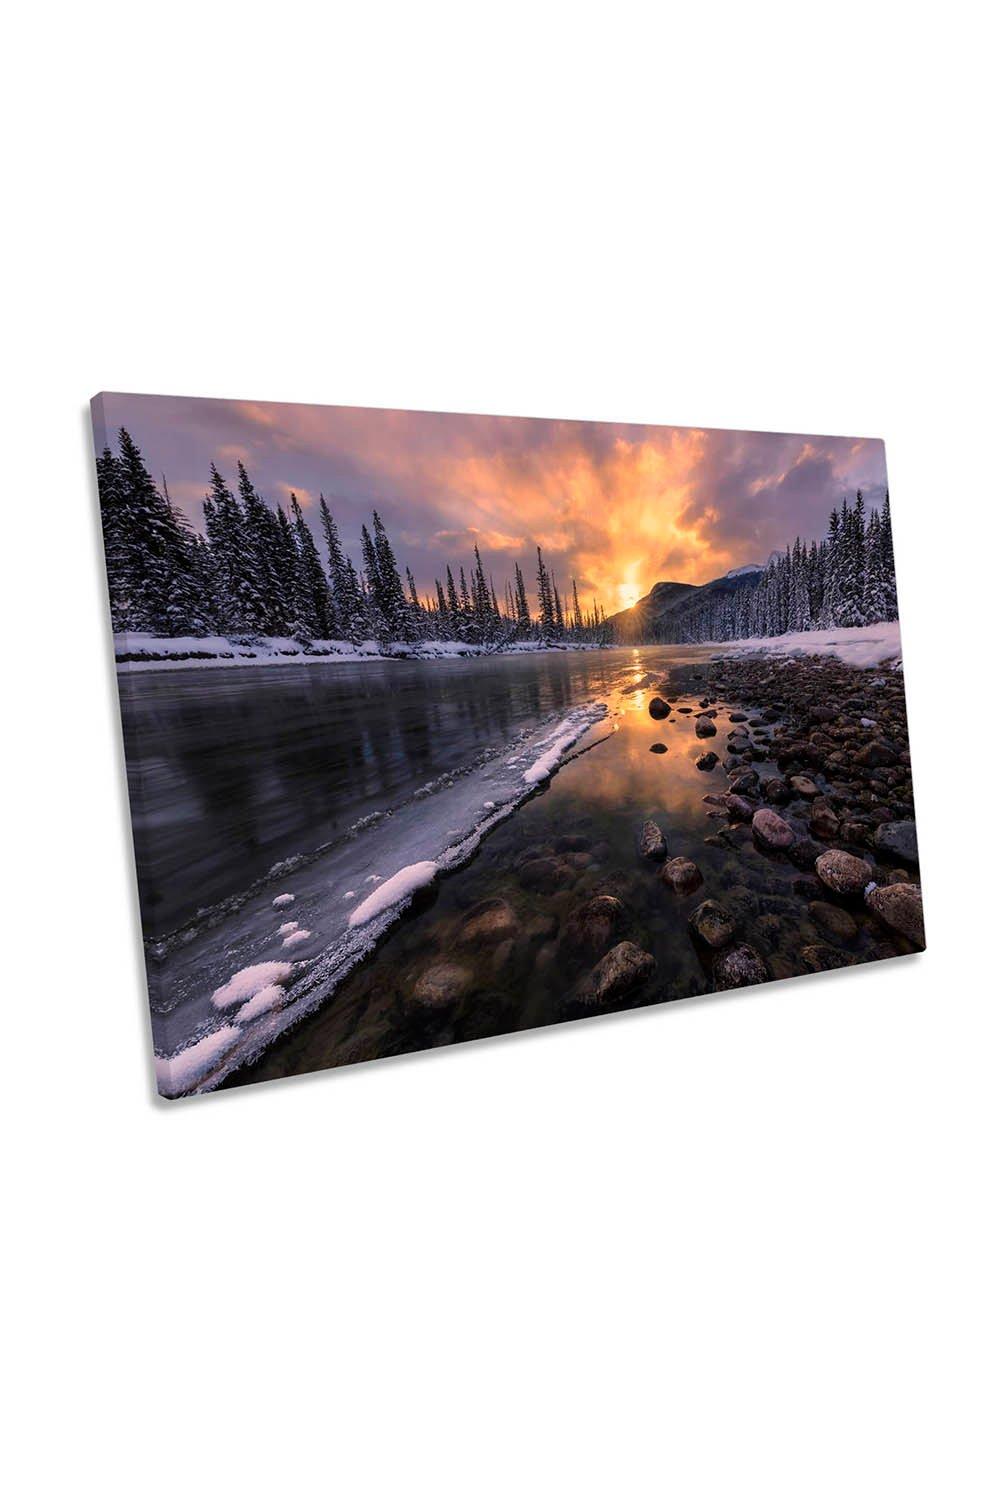 Icy Morning on Fire Winter Landscape Canvas Wall Art Picture Print